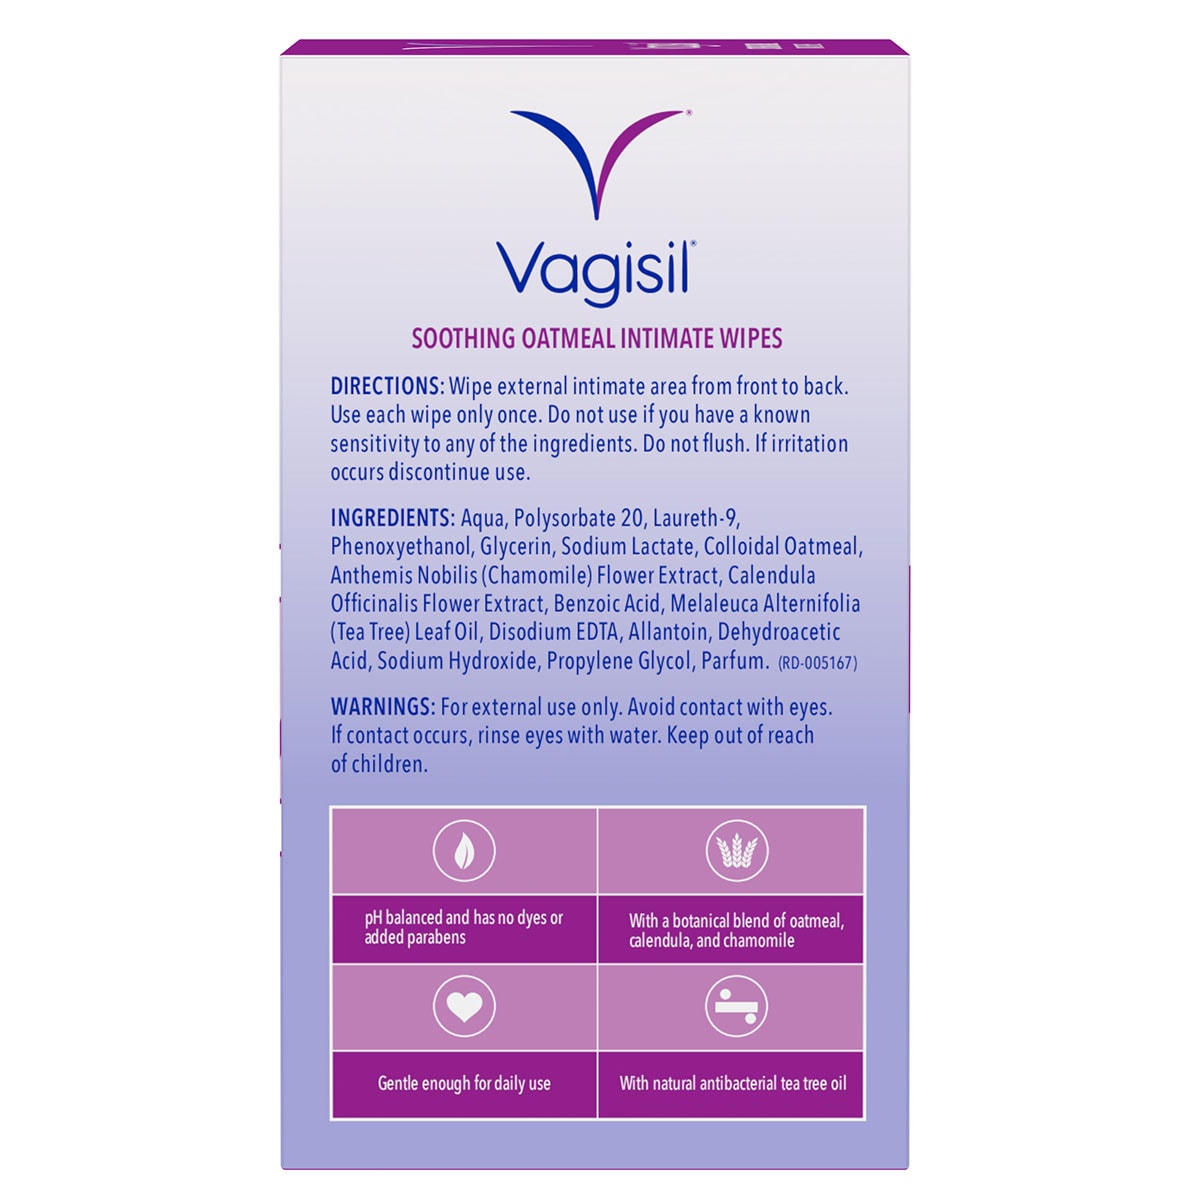 Vagisil Soothing Oatmeal Intimate Wipes 12 Pack